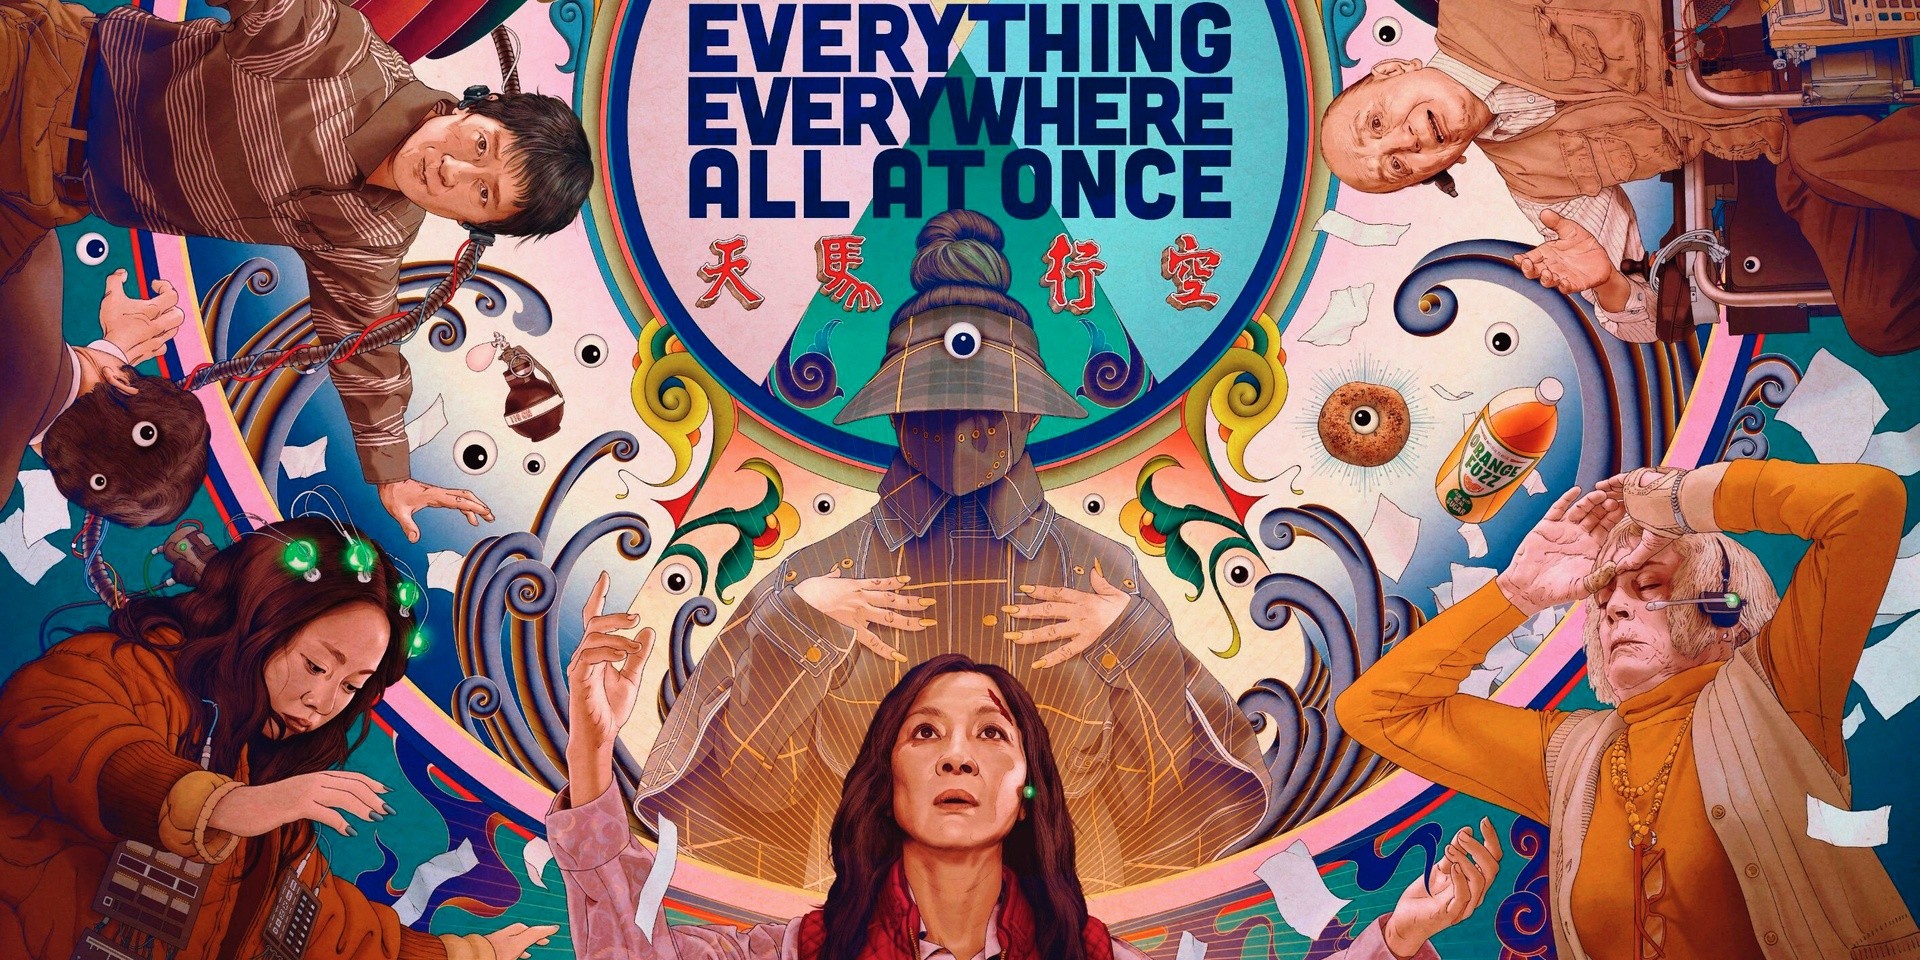 Everything Everywhere All At Once original soundtrack is now available on vinyl, featuring Son Lux, Mitski, David Byrne, and more